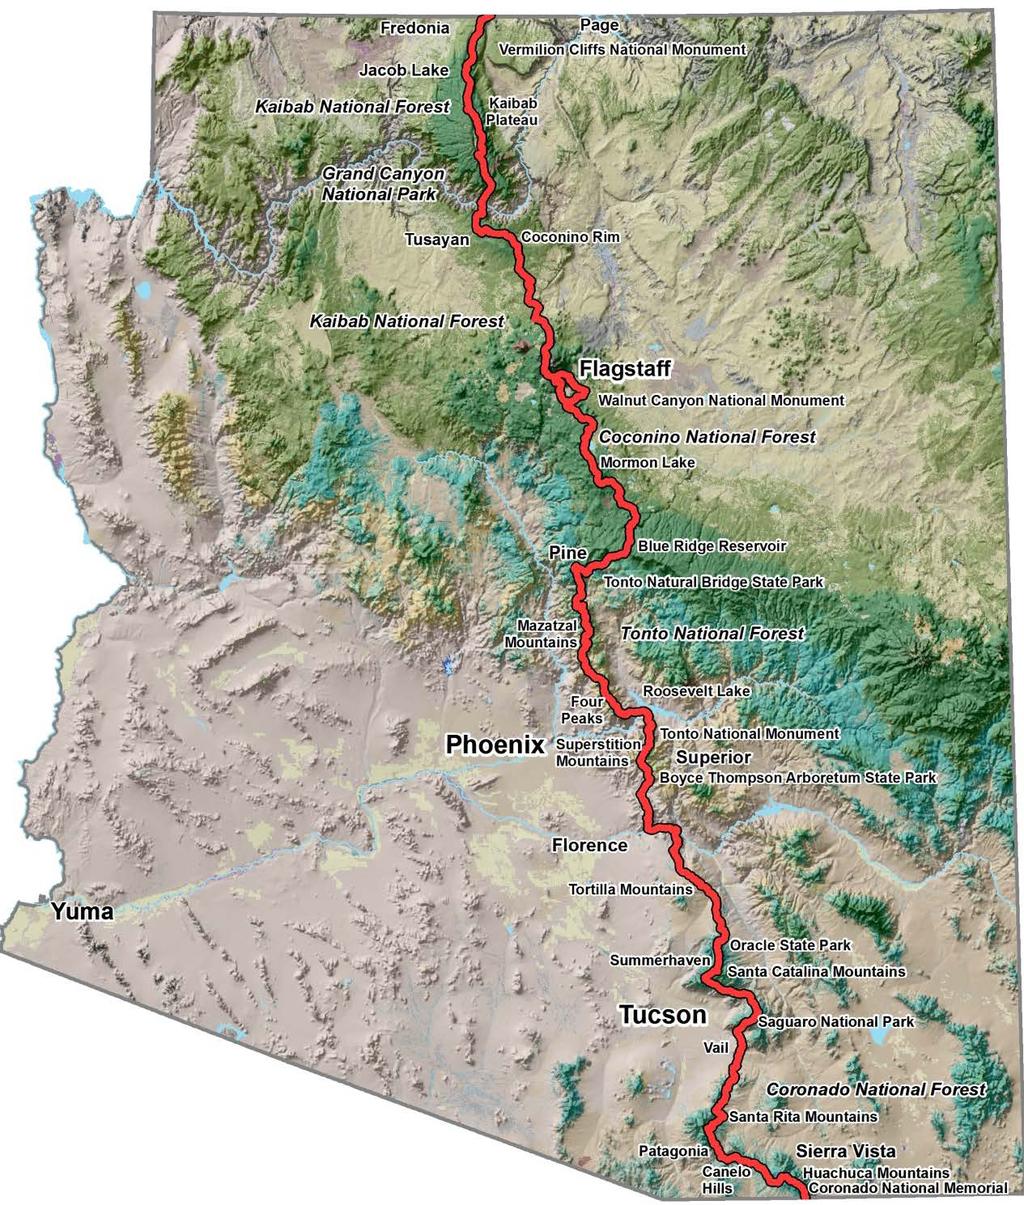 The Arizona National Scenic Trail is an 800 mile recreation trail from Mexico to Utah that connects mountain ranges, canyons, deserts, forests, wilderness areas, historic sites, trail systems, points